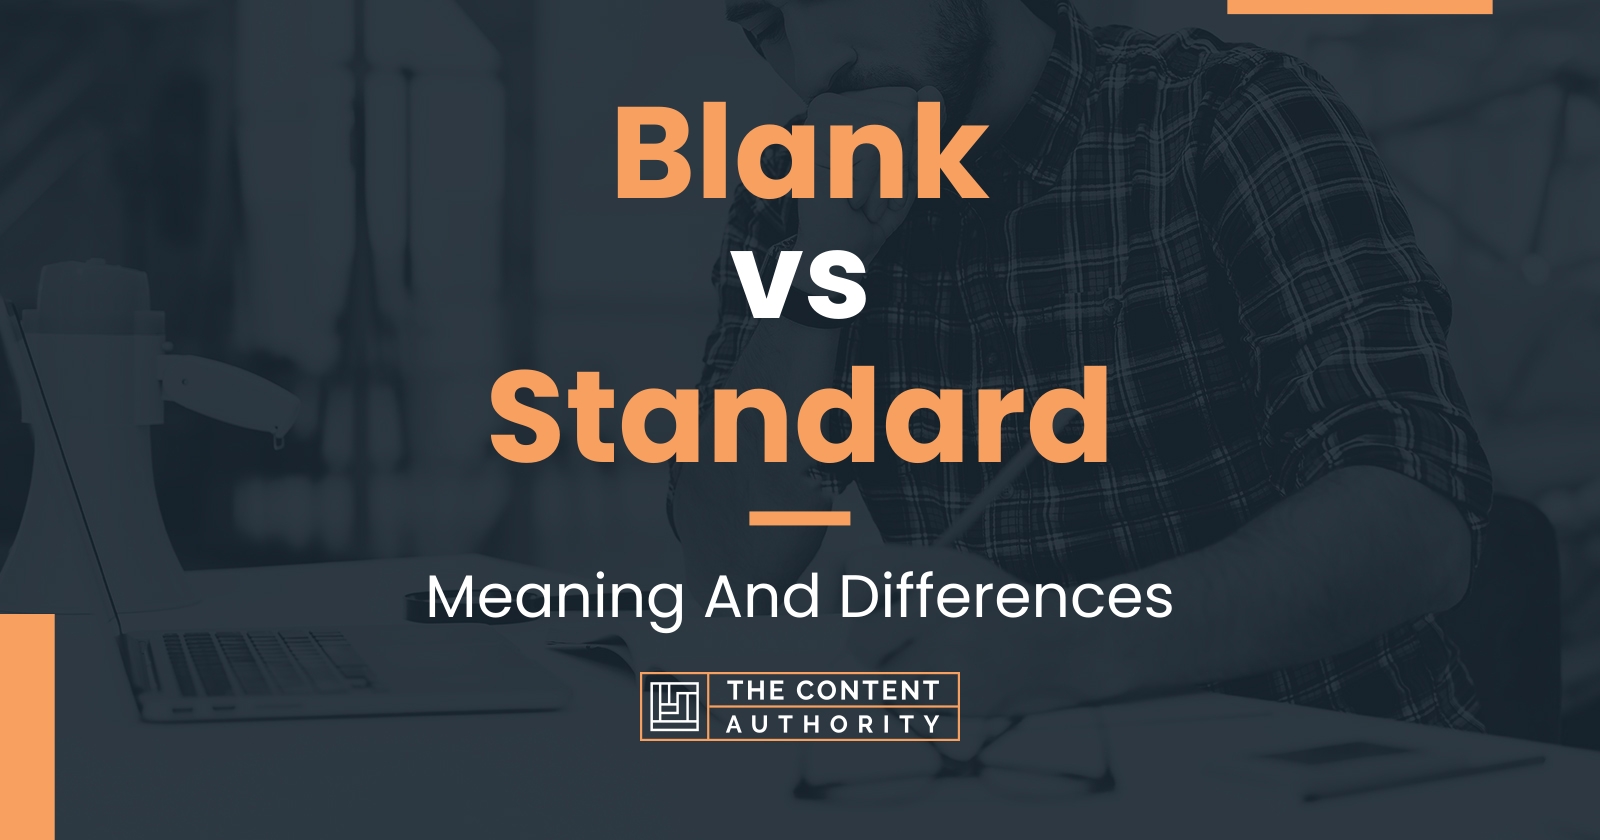 Blank vs Standard: Meaning And Differences